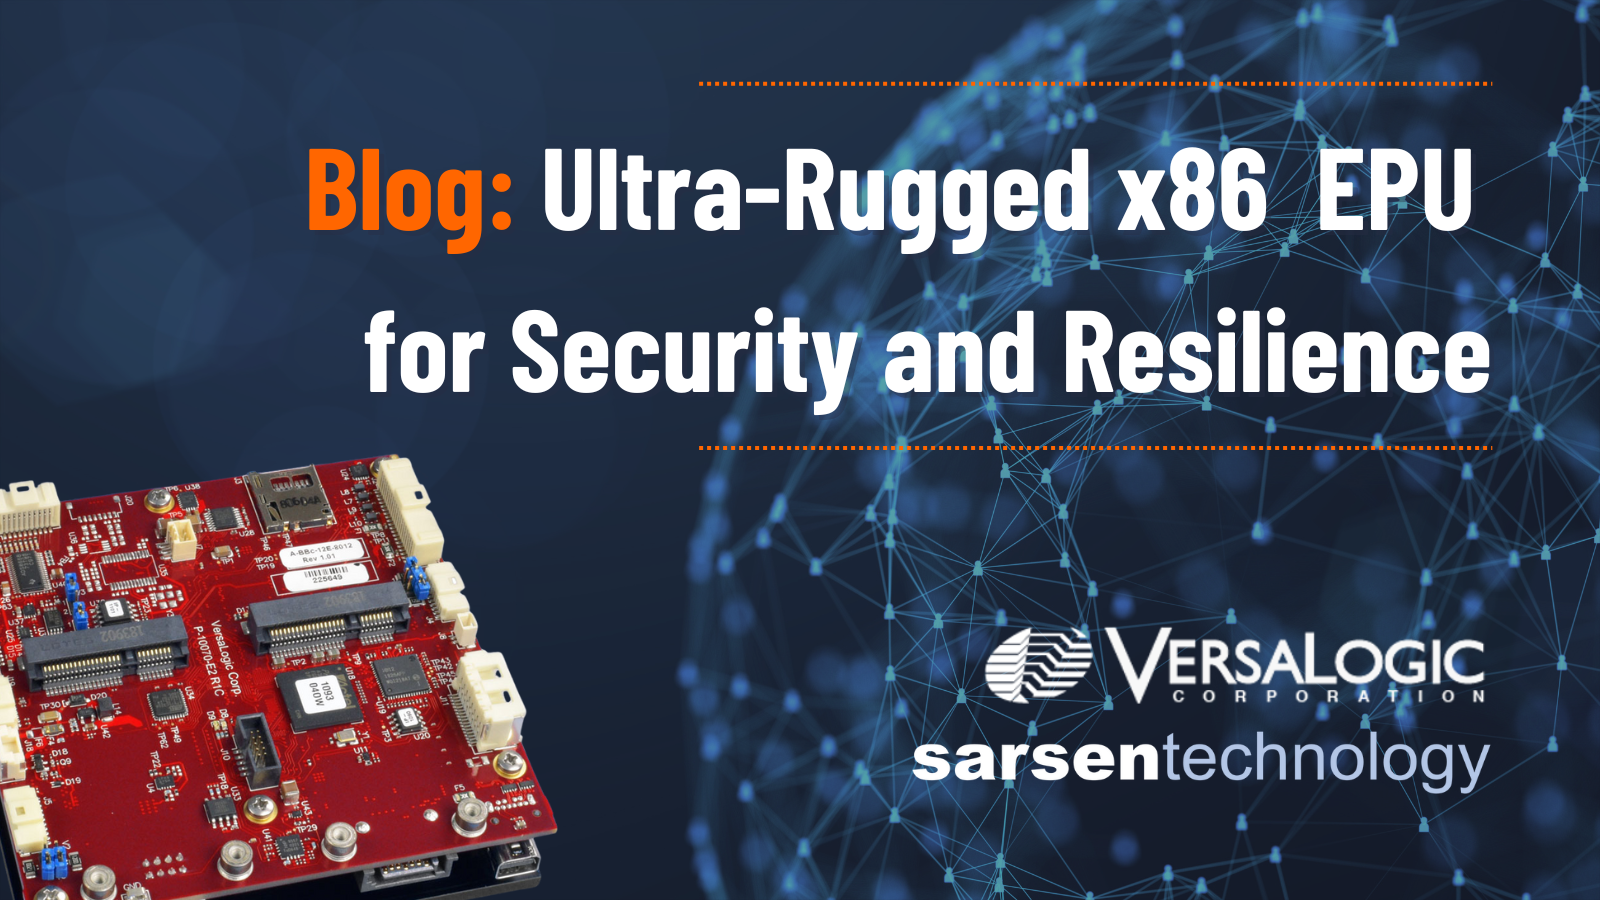 OWL - Ultra-Rugged x86 EPU for Security and Resilience